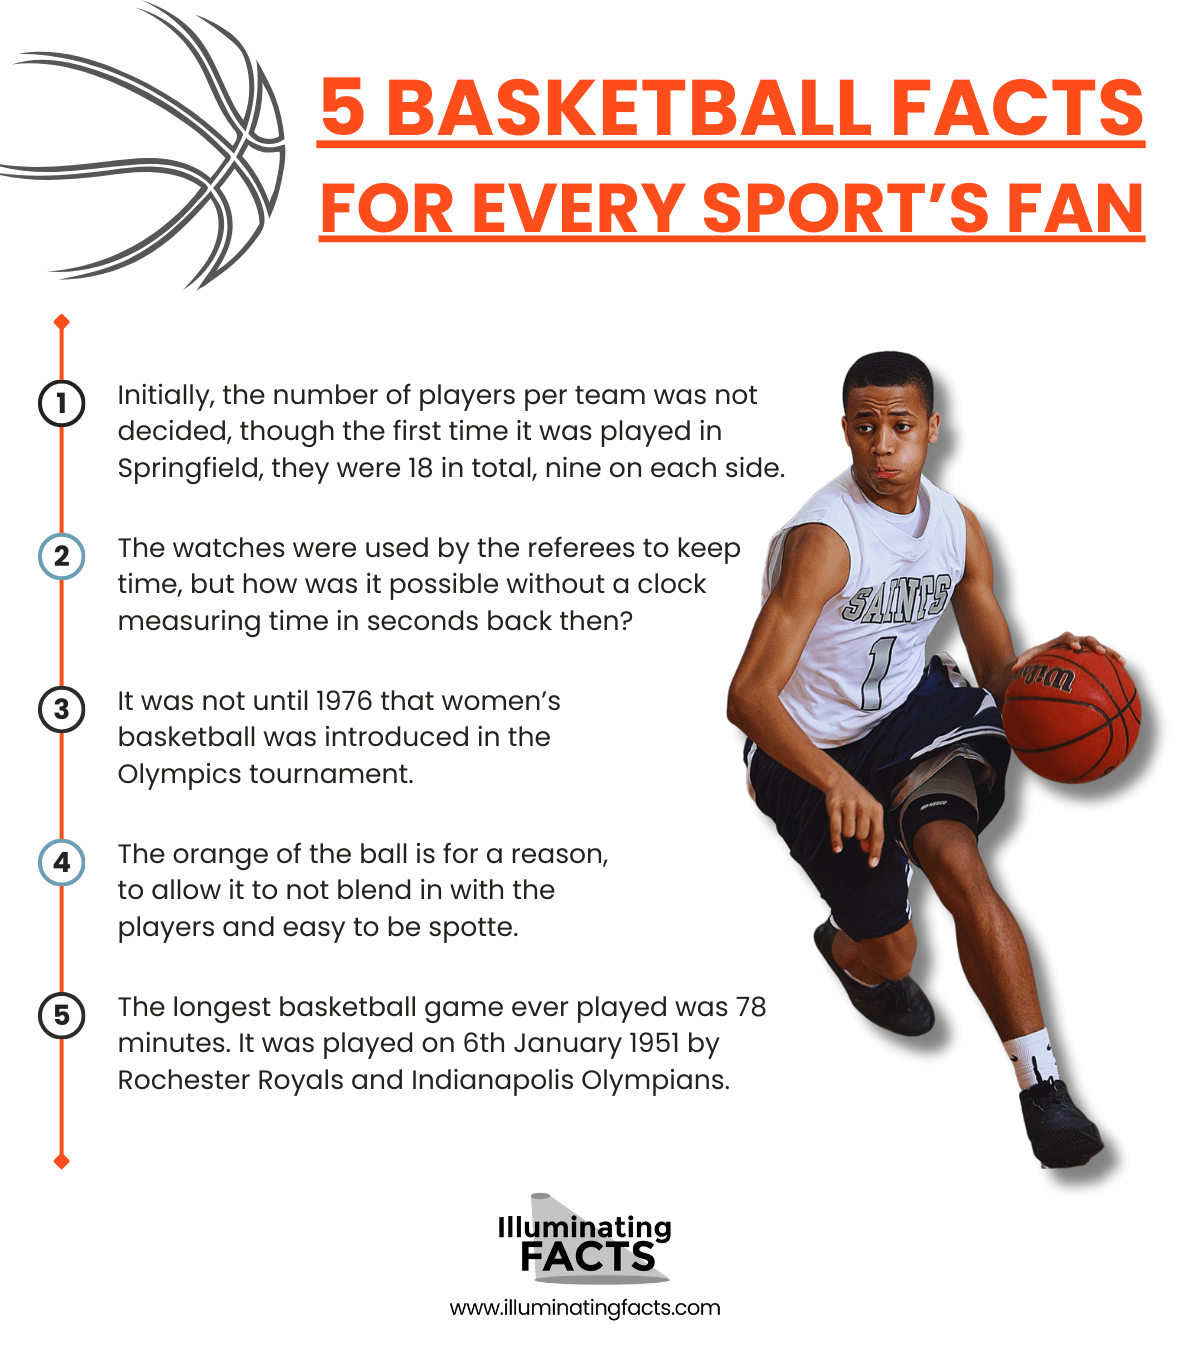 5 Basketball Facts for Every Sport’s Fan